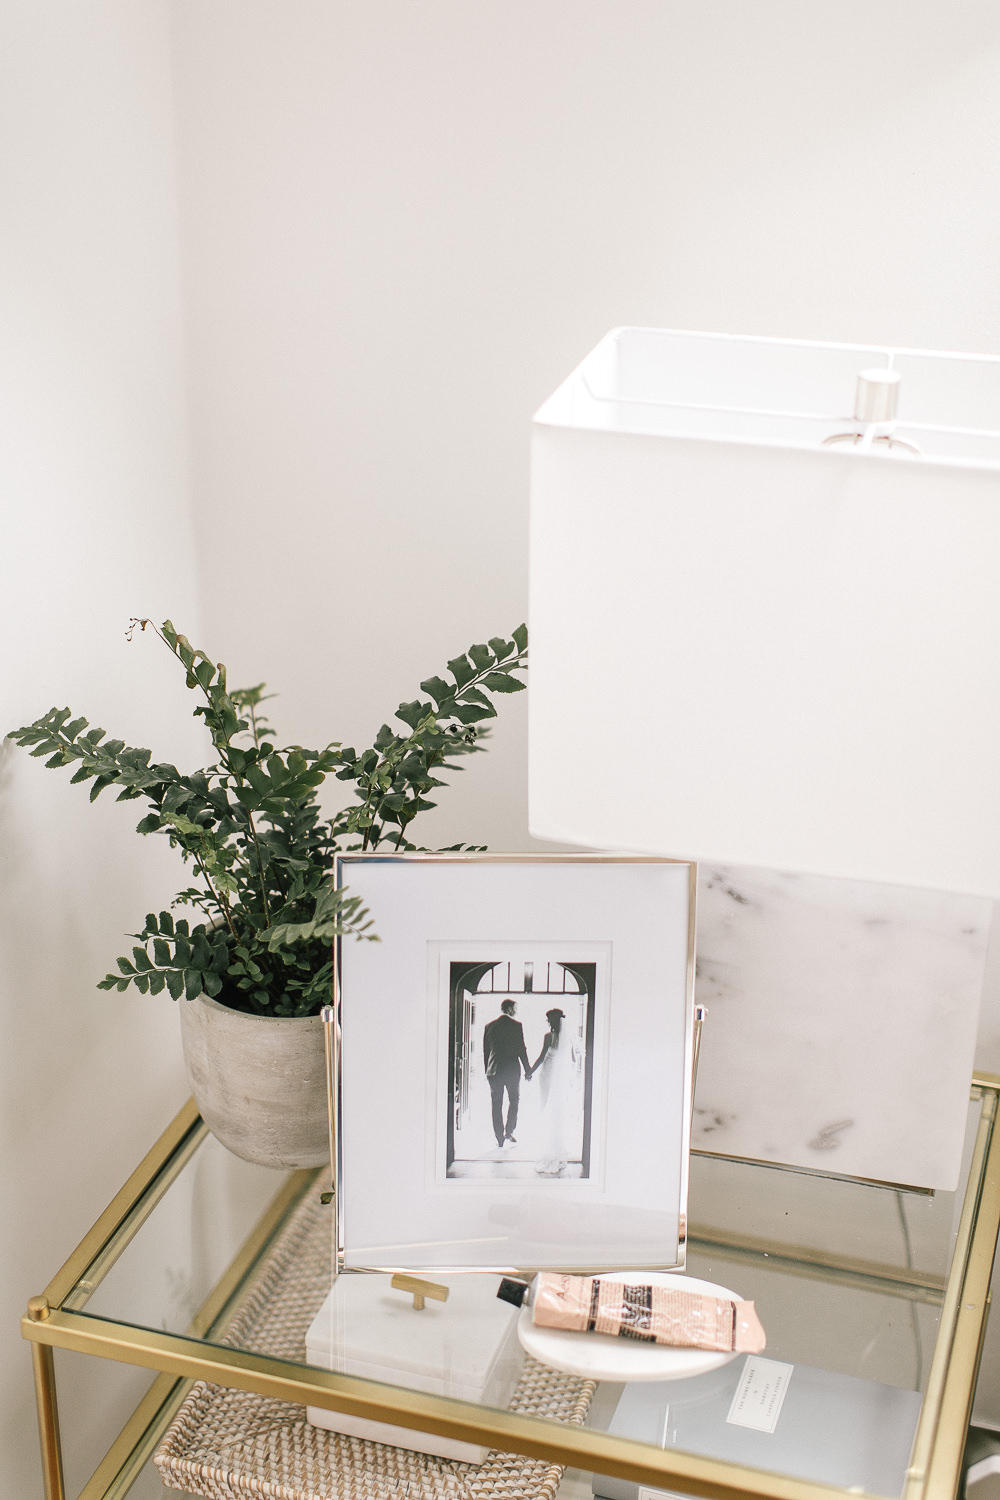 Marble Lamp from Homesense | Concrete Planter | The White Company Photo Frame